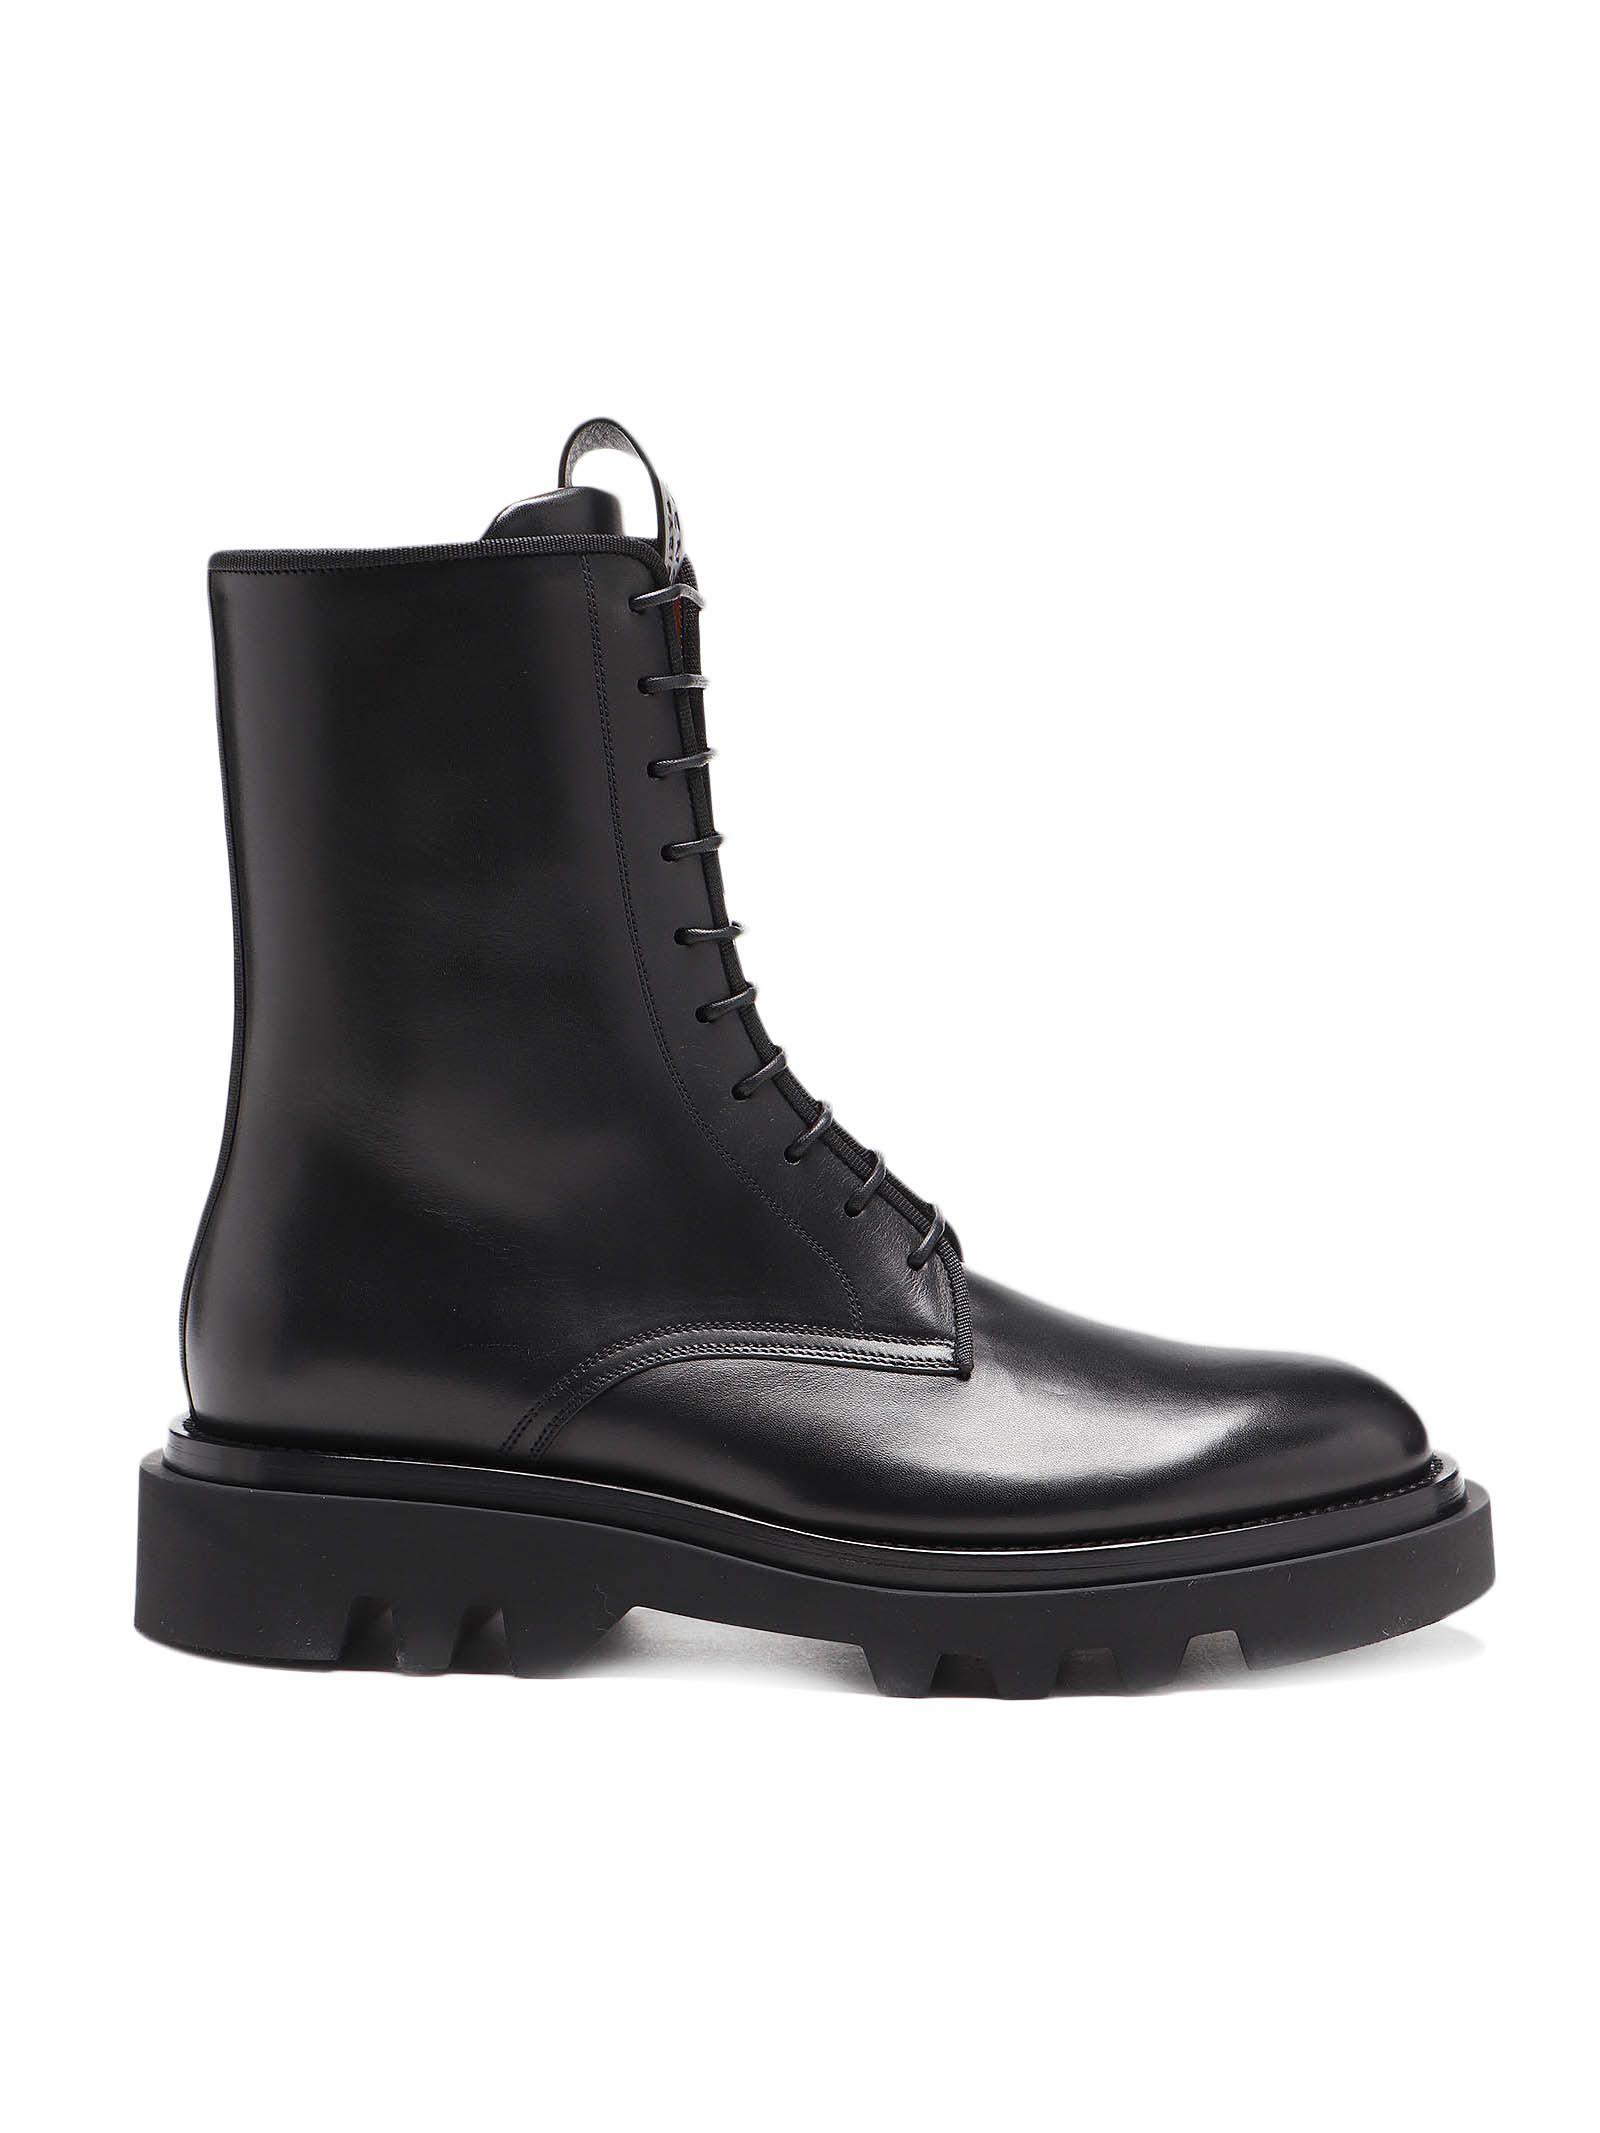 Givenchy Boots | italist, ALWAYS LIKE A SALE